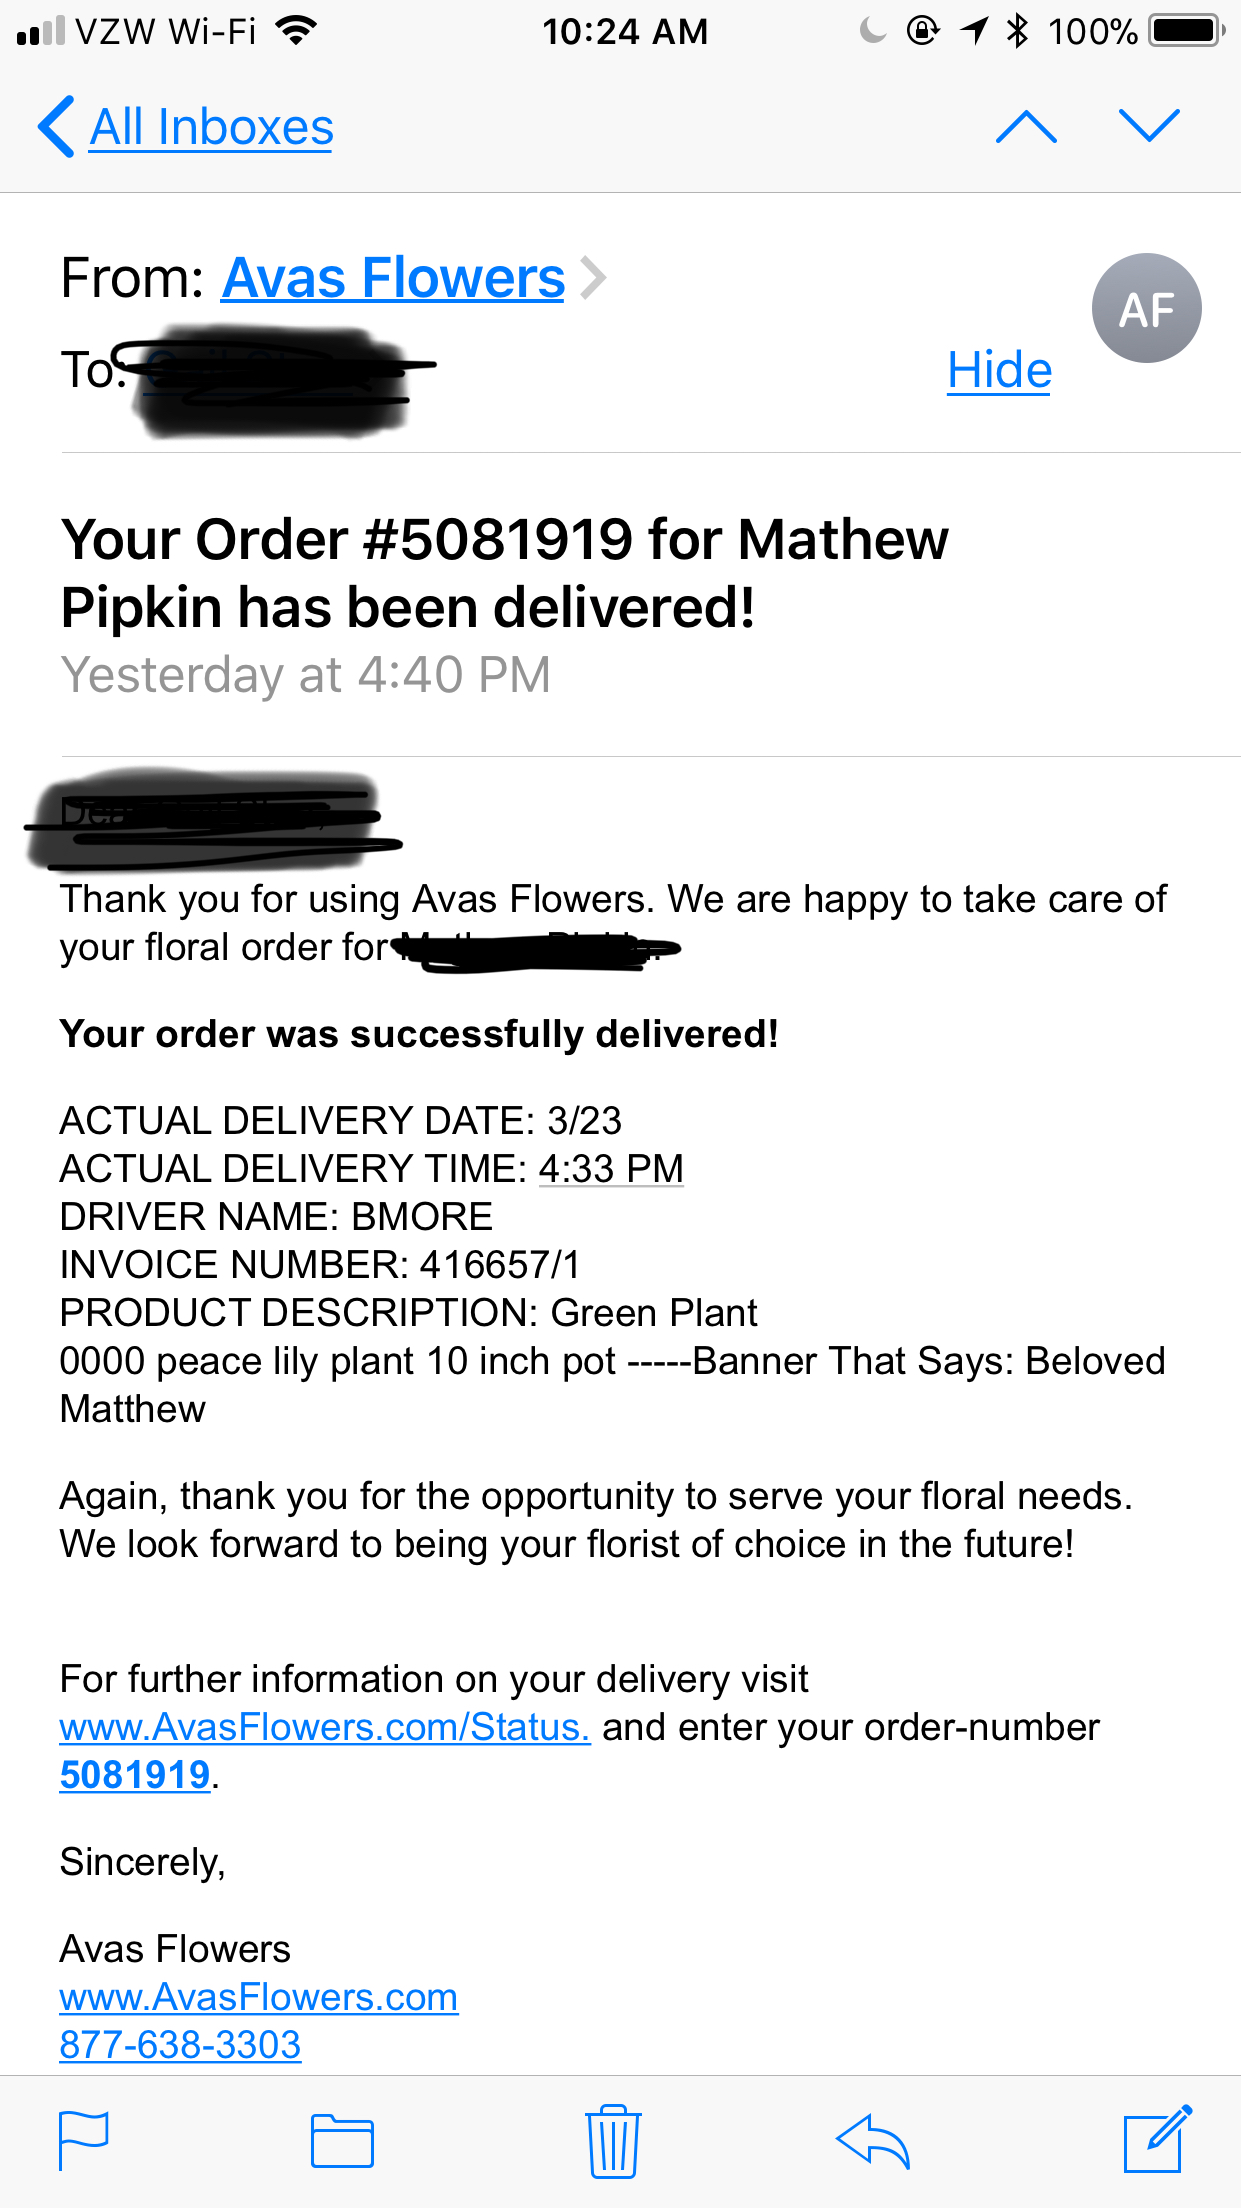 Email "ACTUAL DELIVERY TIME" after funeral ended